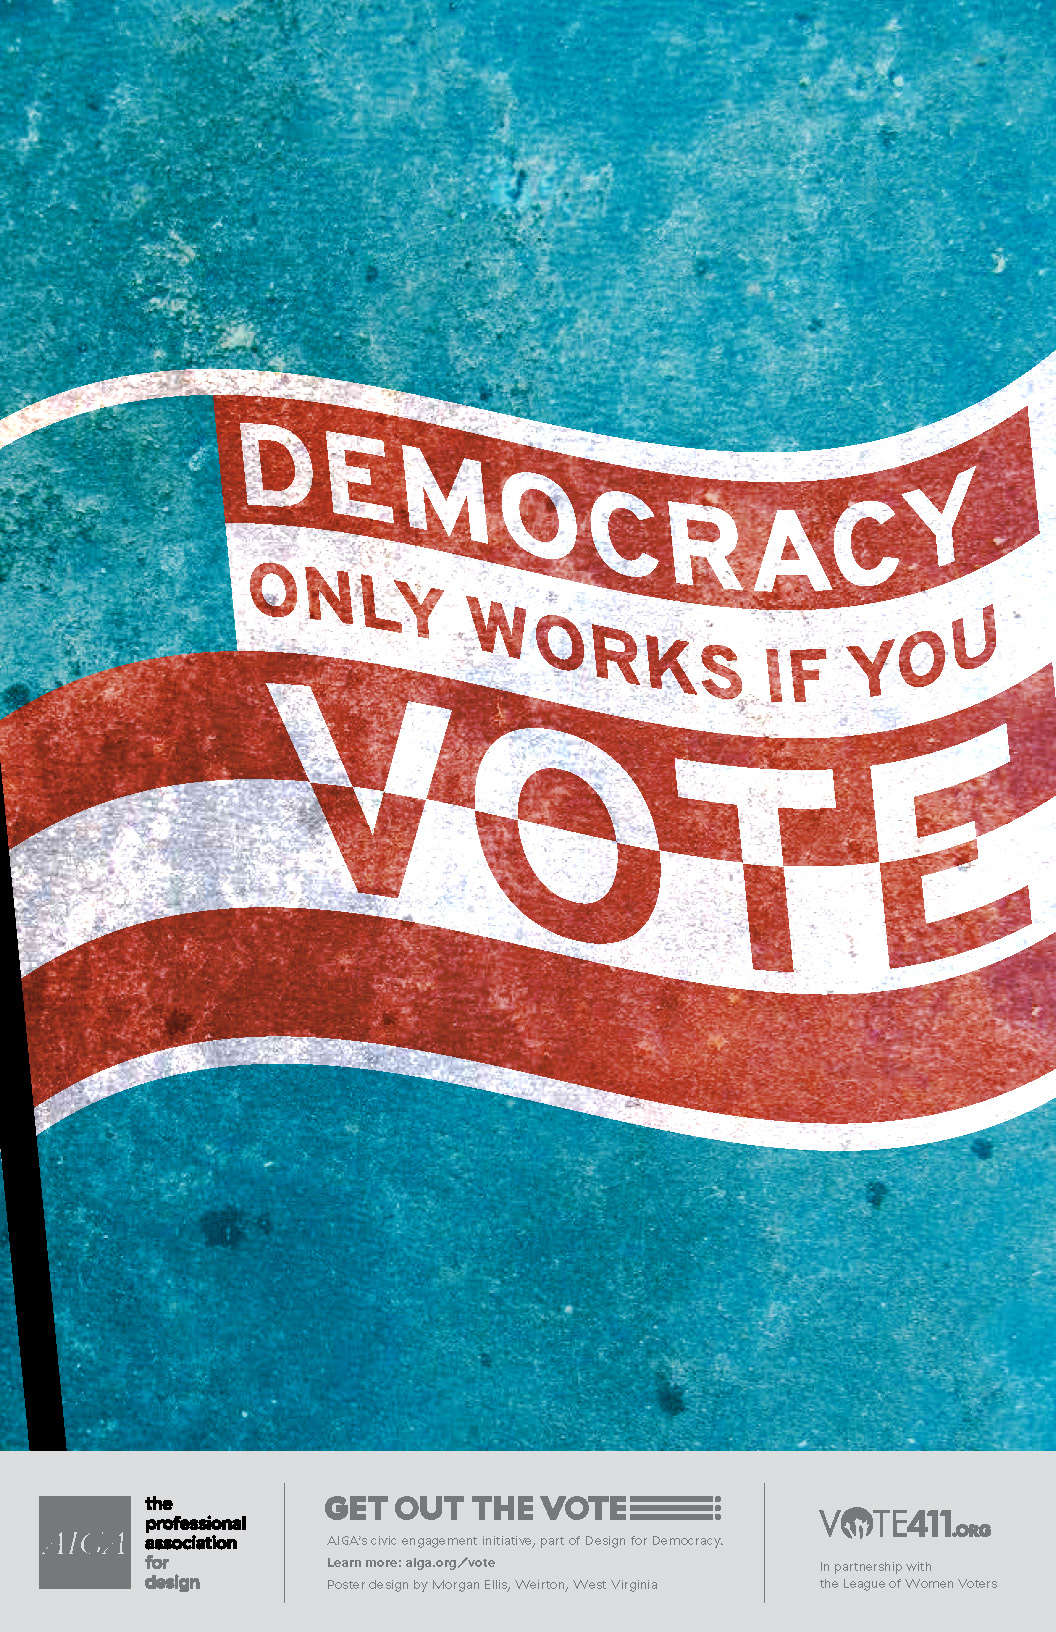 This poster design is focusing on a feeling of patriotism. The poster design features a stylized American flag waving in the wind, with the typography 'Democracy only works if you vote,' being reversed in and out of the stripes. In the phrase, 'Democracy' is emphasized and 'vote' is emphasized even more, taking up half of the size of the typography. It has a bright limited color palette made up of red, white, and blue to draw the eye in and further the patriotic feeling of the design.